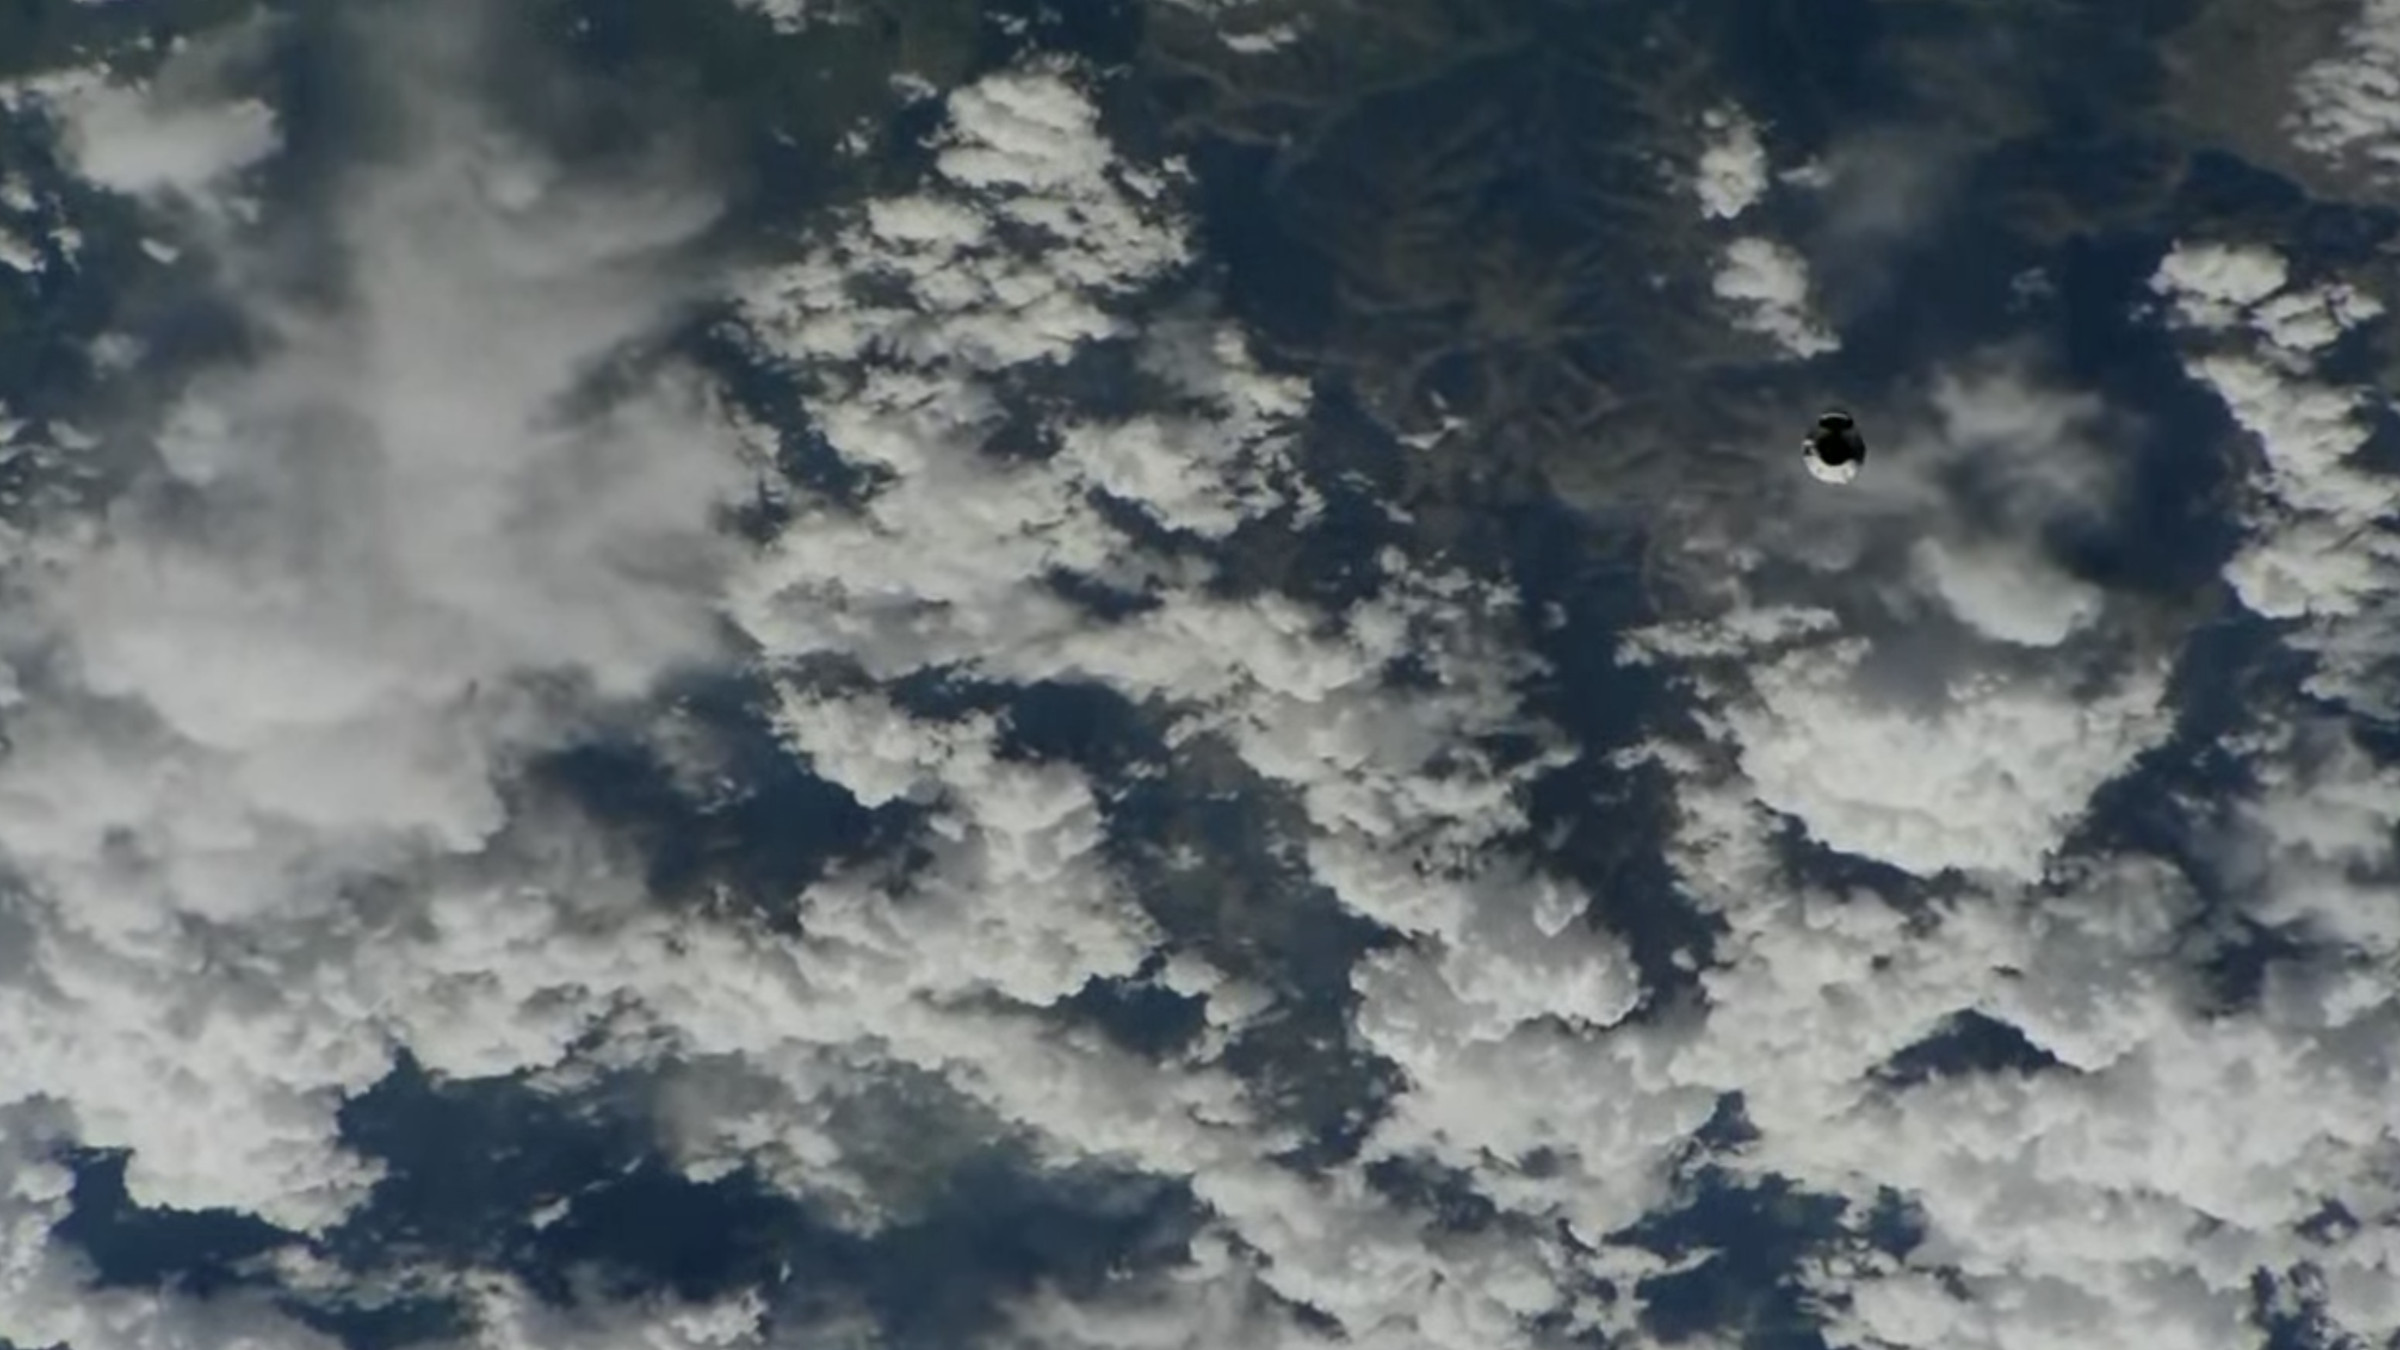 The Crew Dragon as seen from the space station, about two hours before the capsule docked with the ISS.